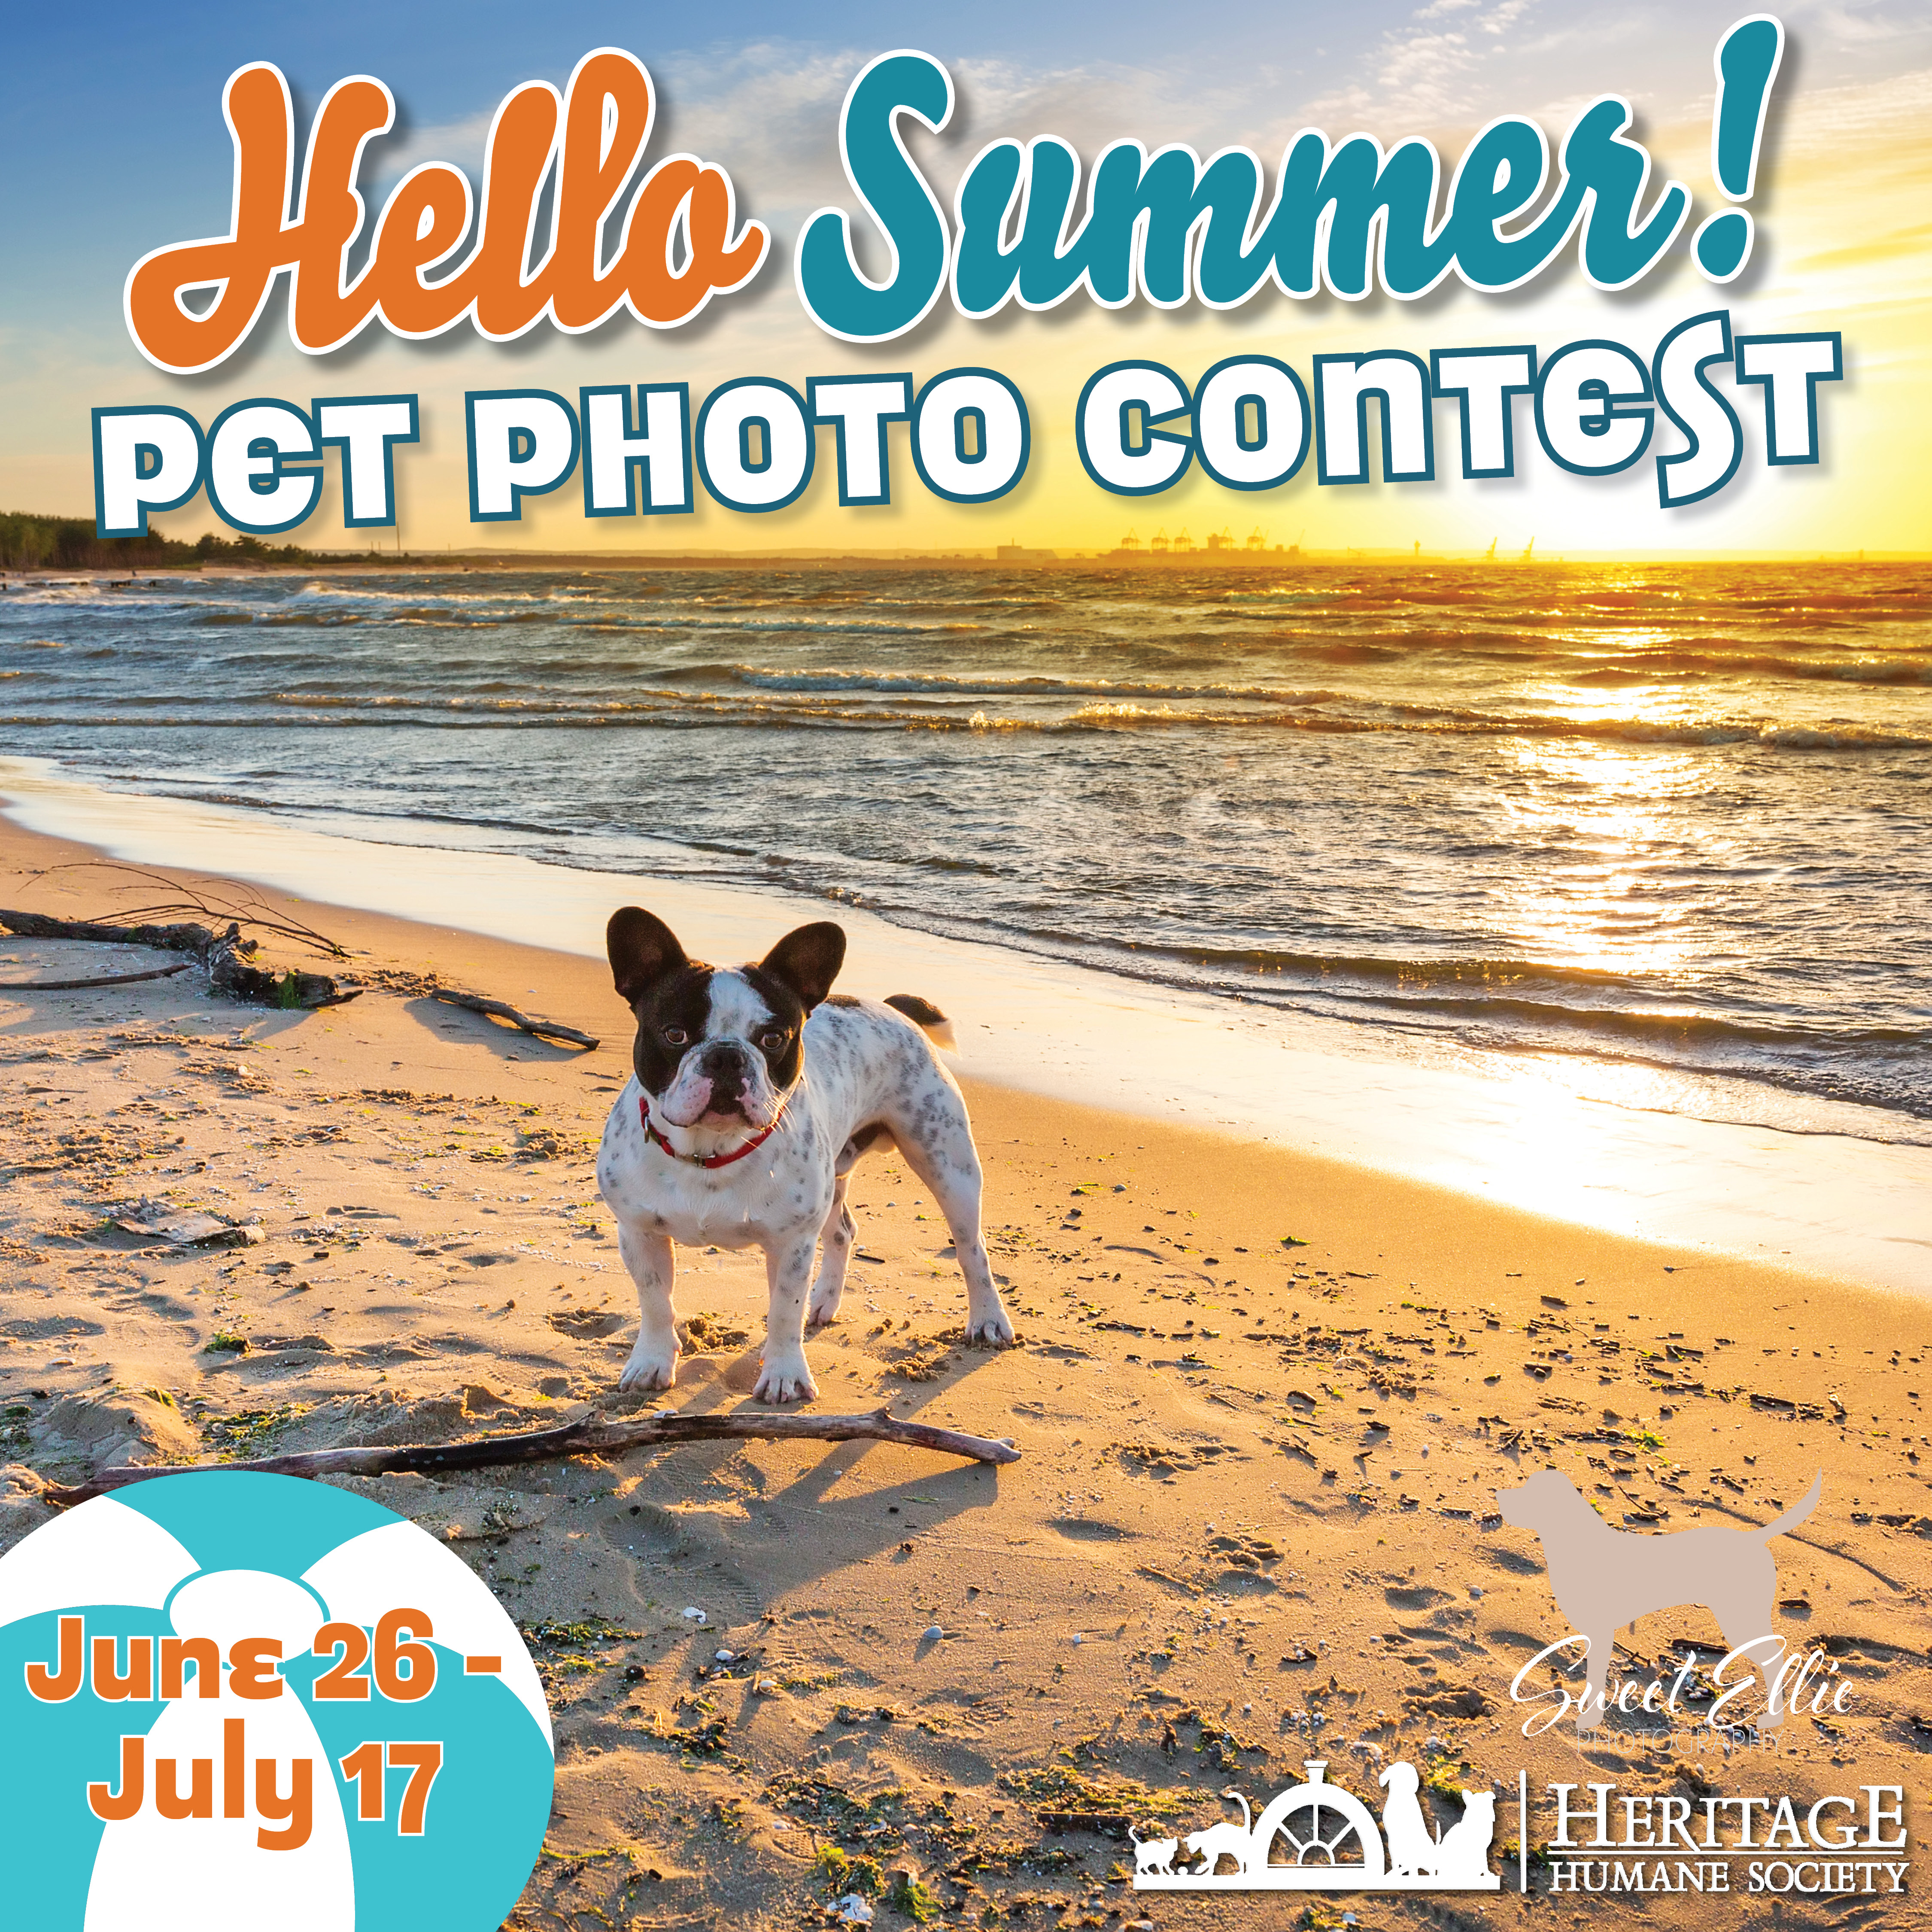 Hello Summer Pet Photo Contest Invites You to Join In